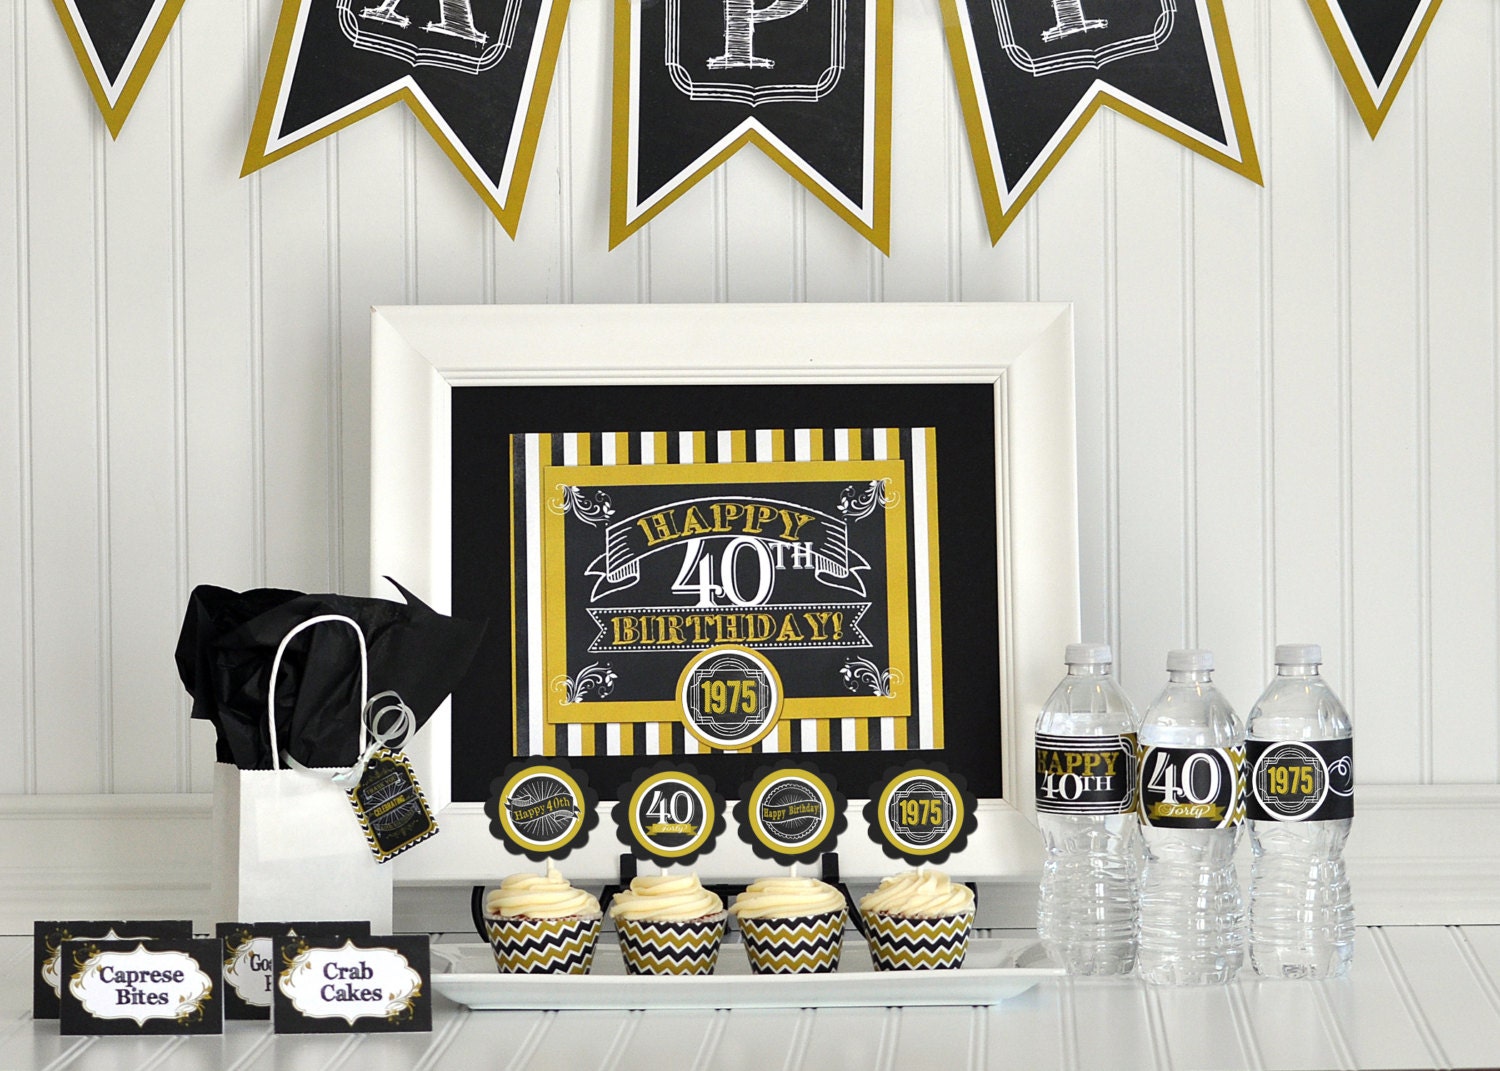  40th  Birthday  Party  Package  40th  Birthday  by GracenLDesigns